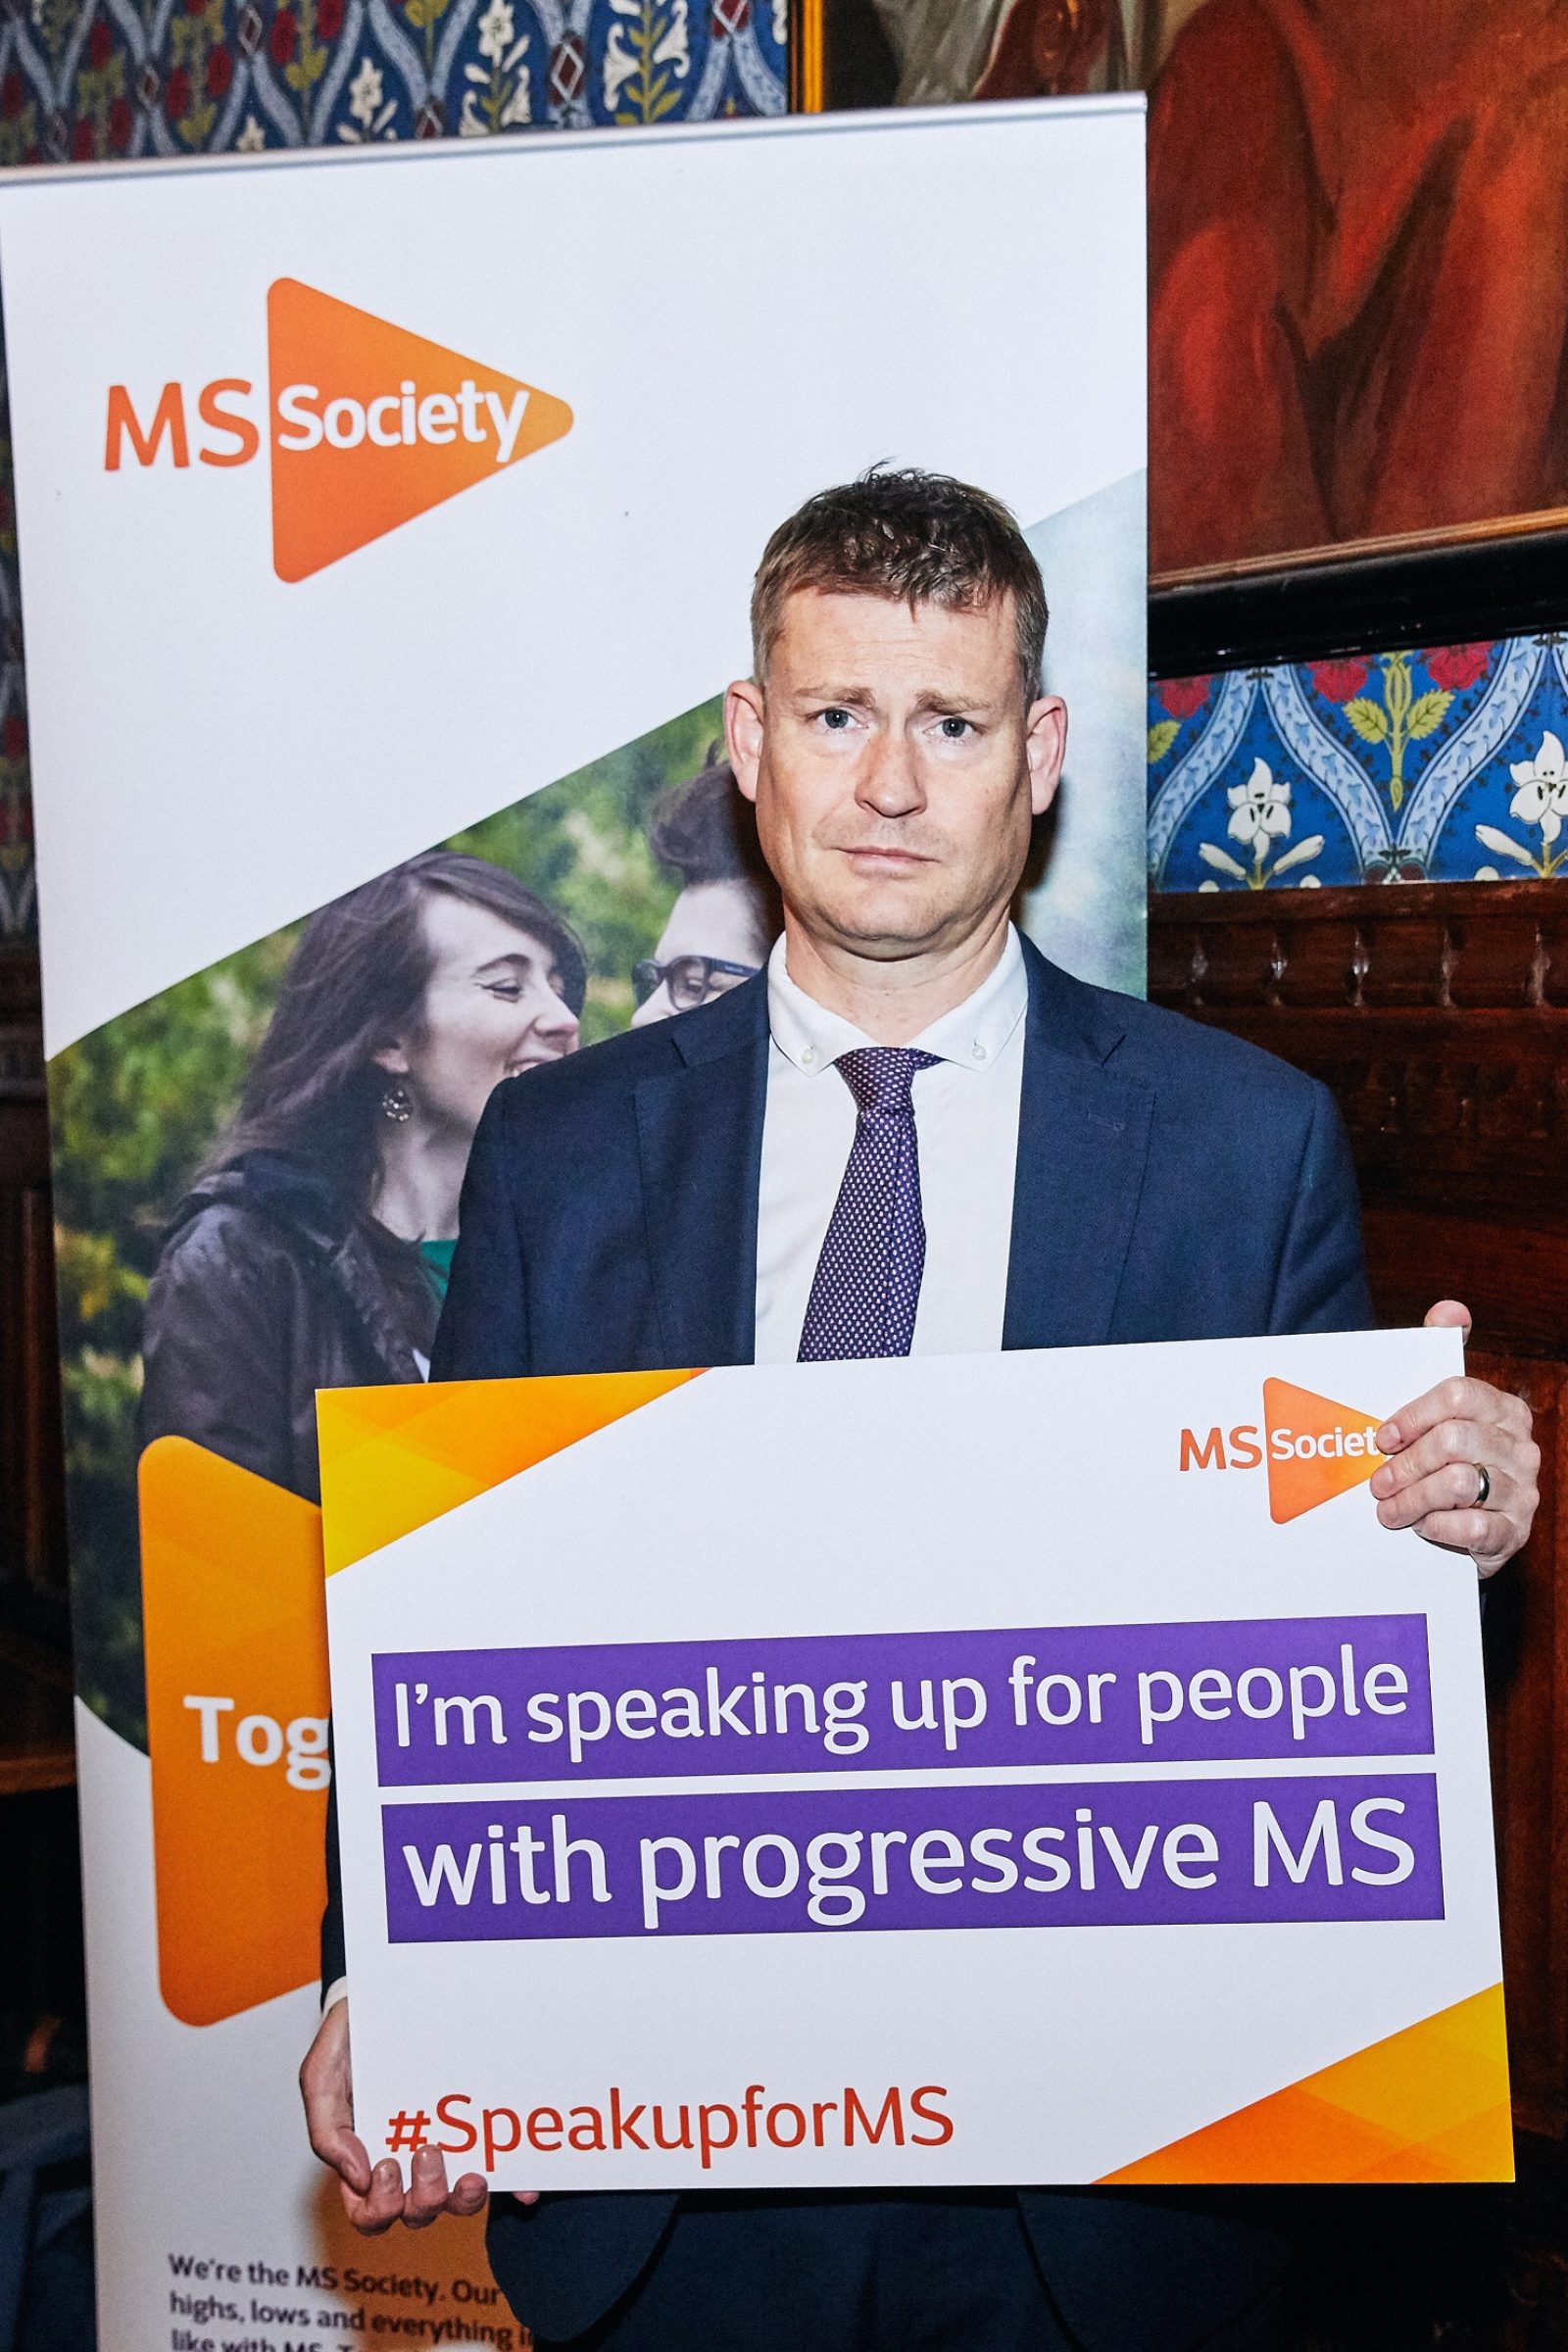 Speaking up for people with progressive MS